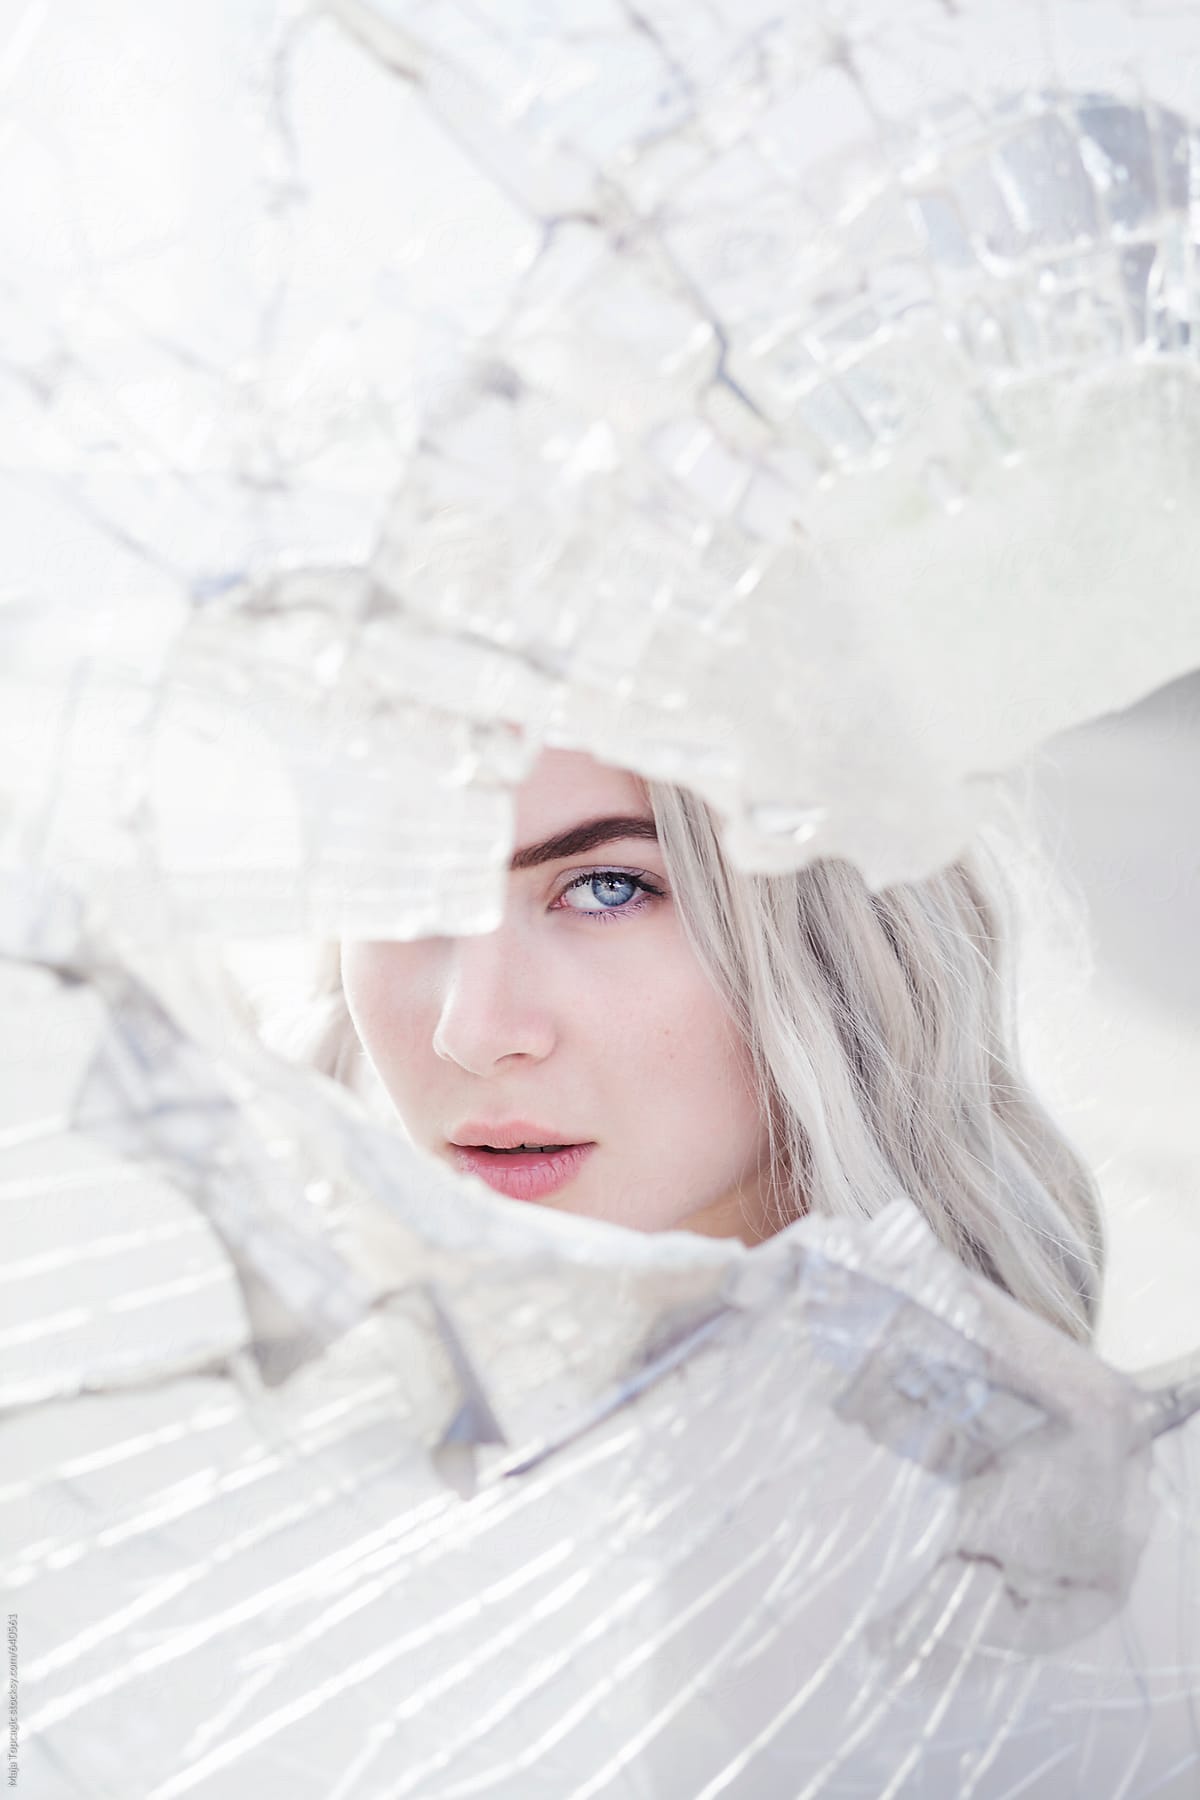 Young beautiful woman with grey hair and blue eyes looking through broken glass